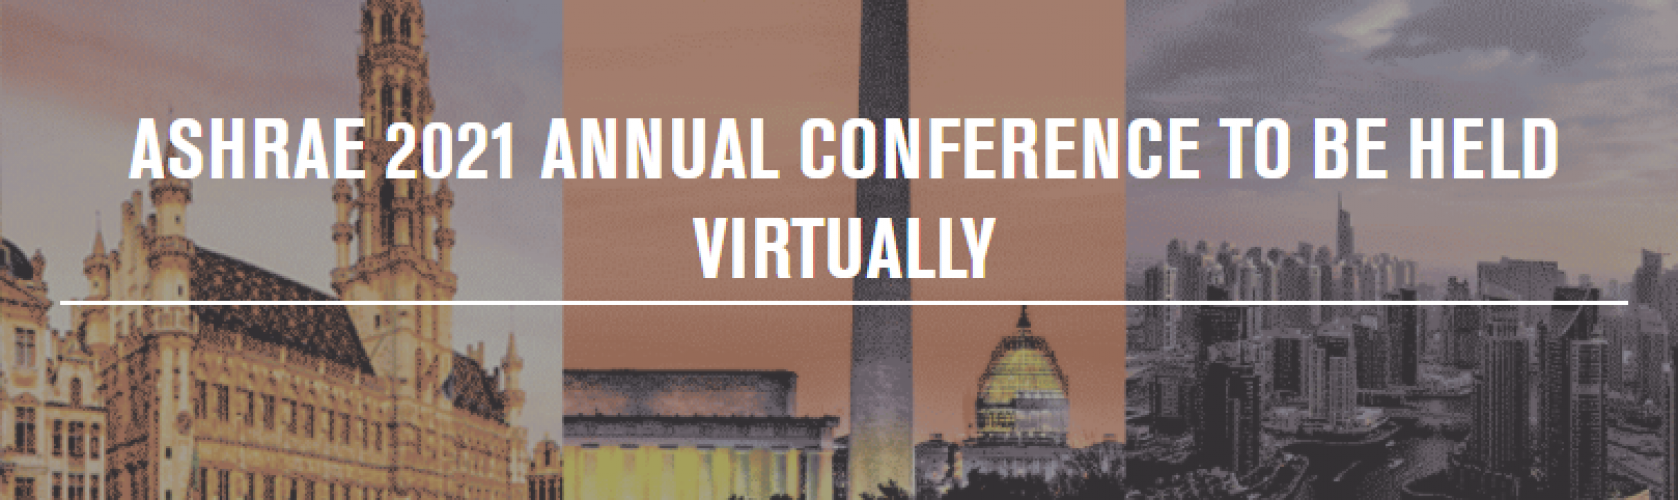 ASHRAE 2021 Annual Conference To Be Held Virtually